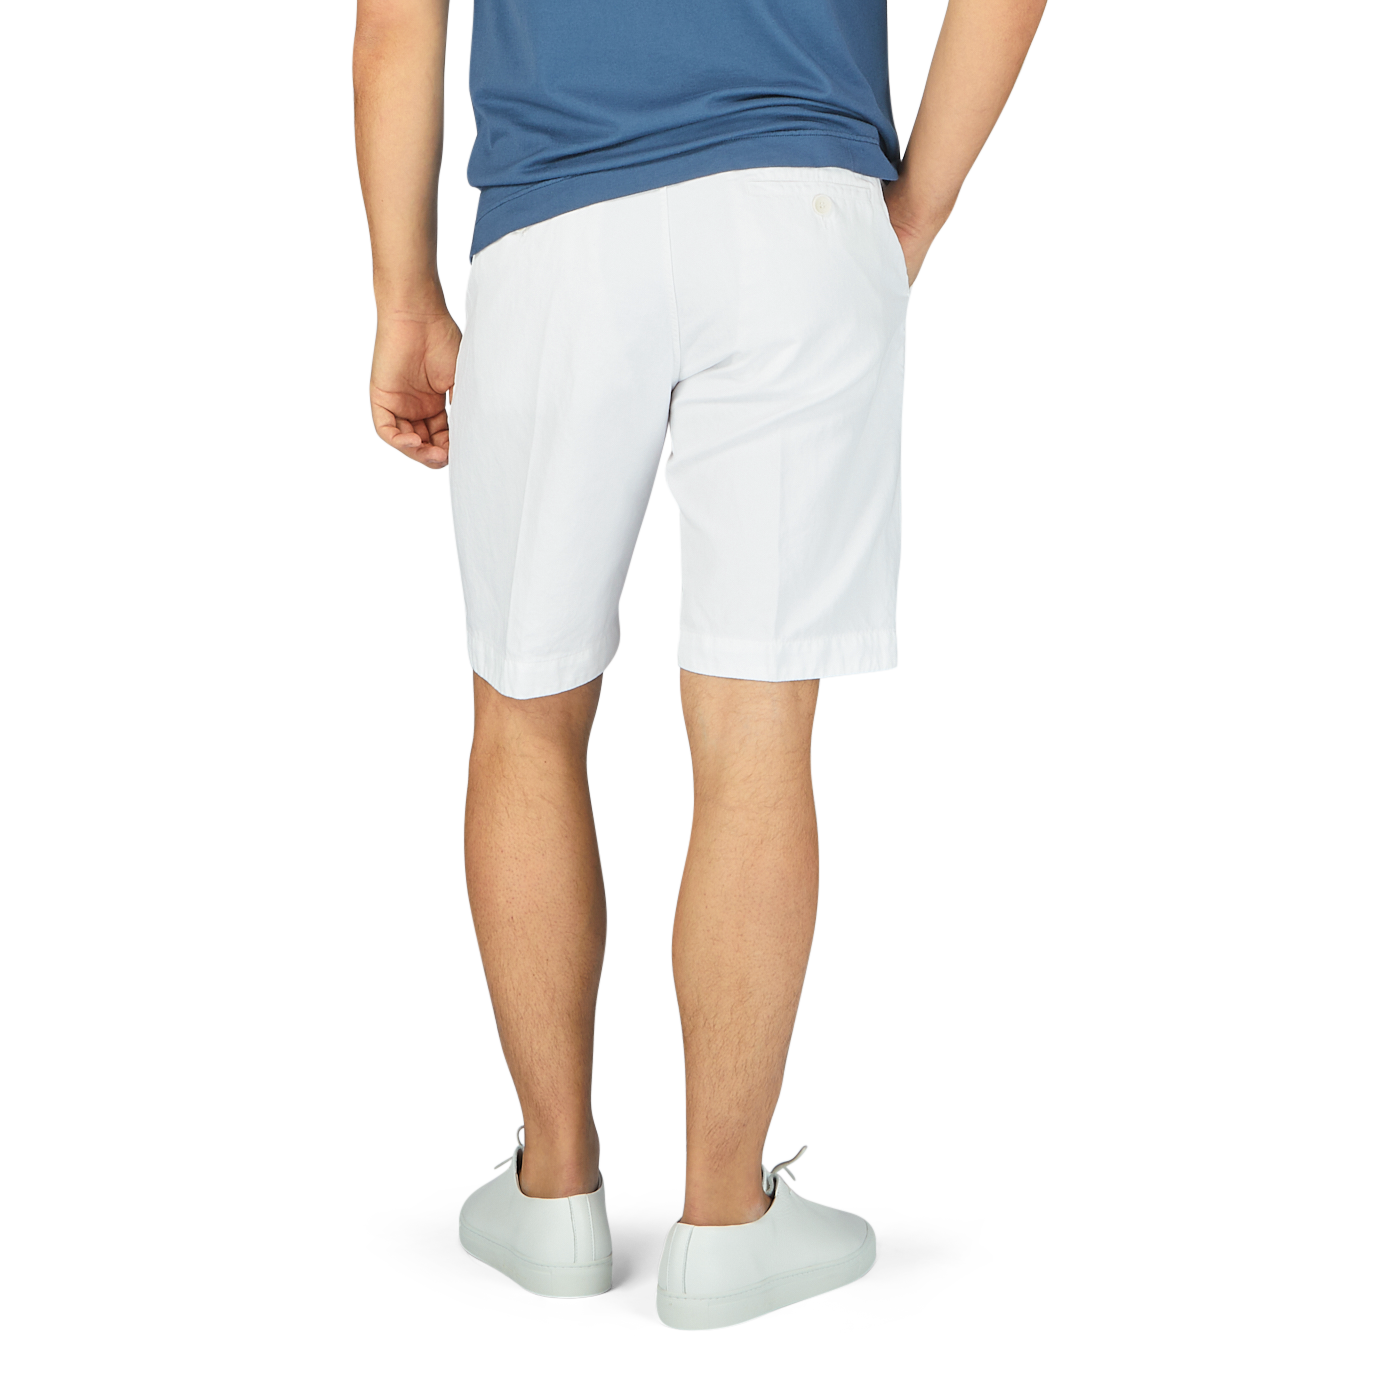 The man is wearing White Cotton Linen Bermuda Shorts and a blue shirt by Tela Genova.